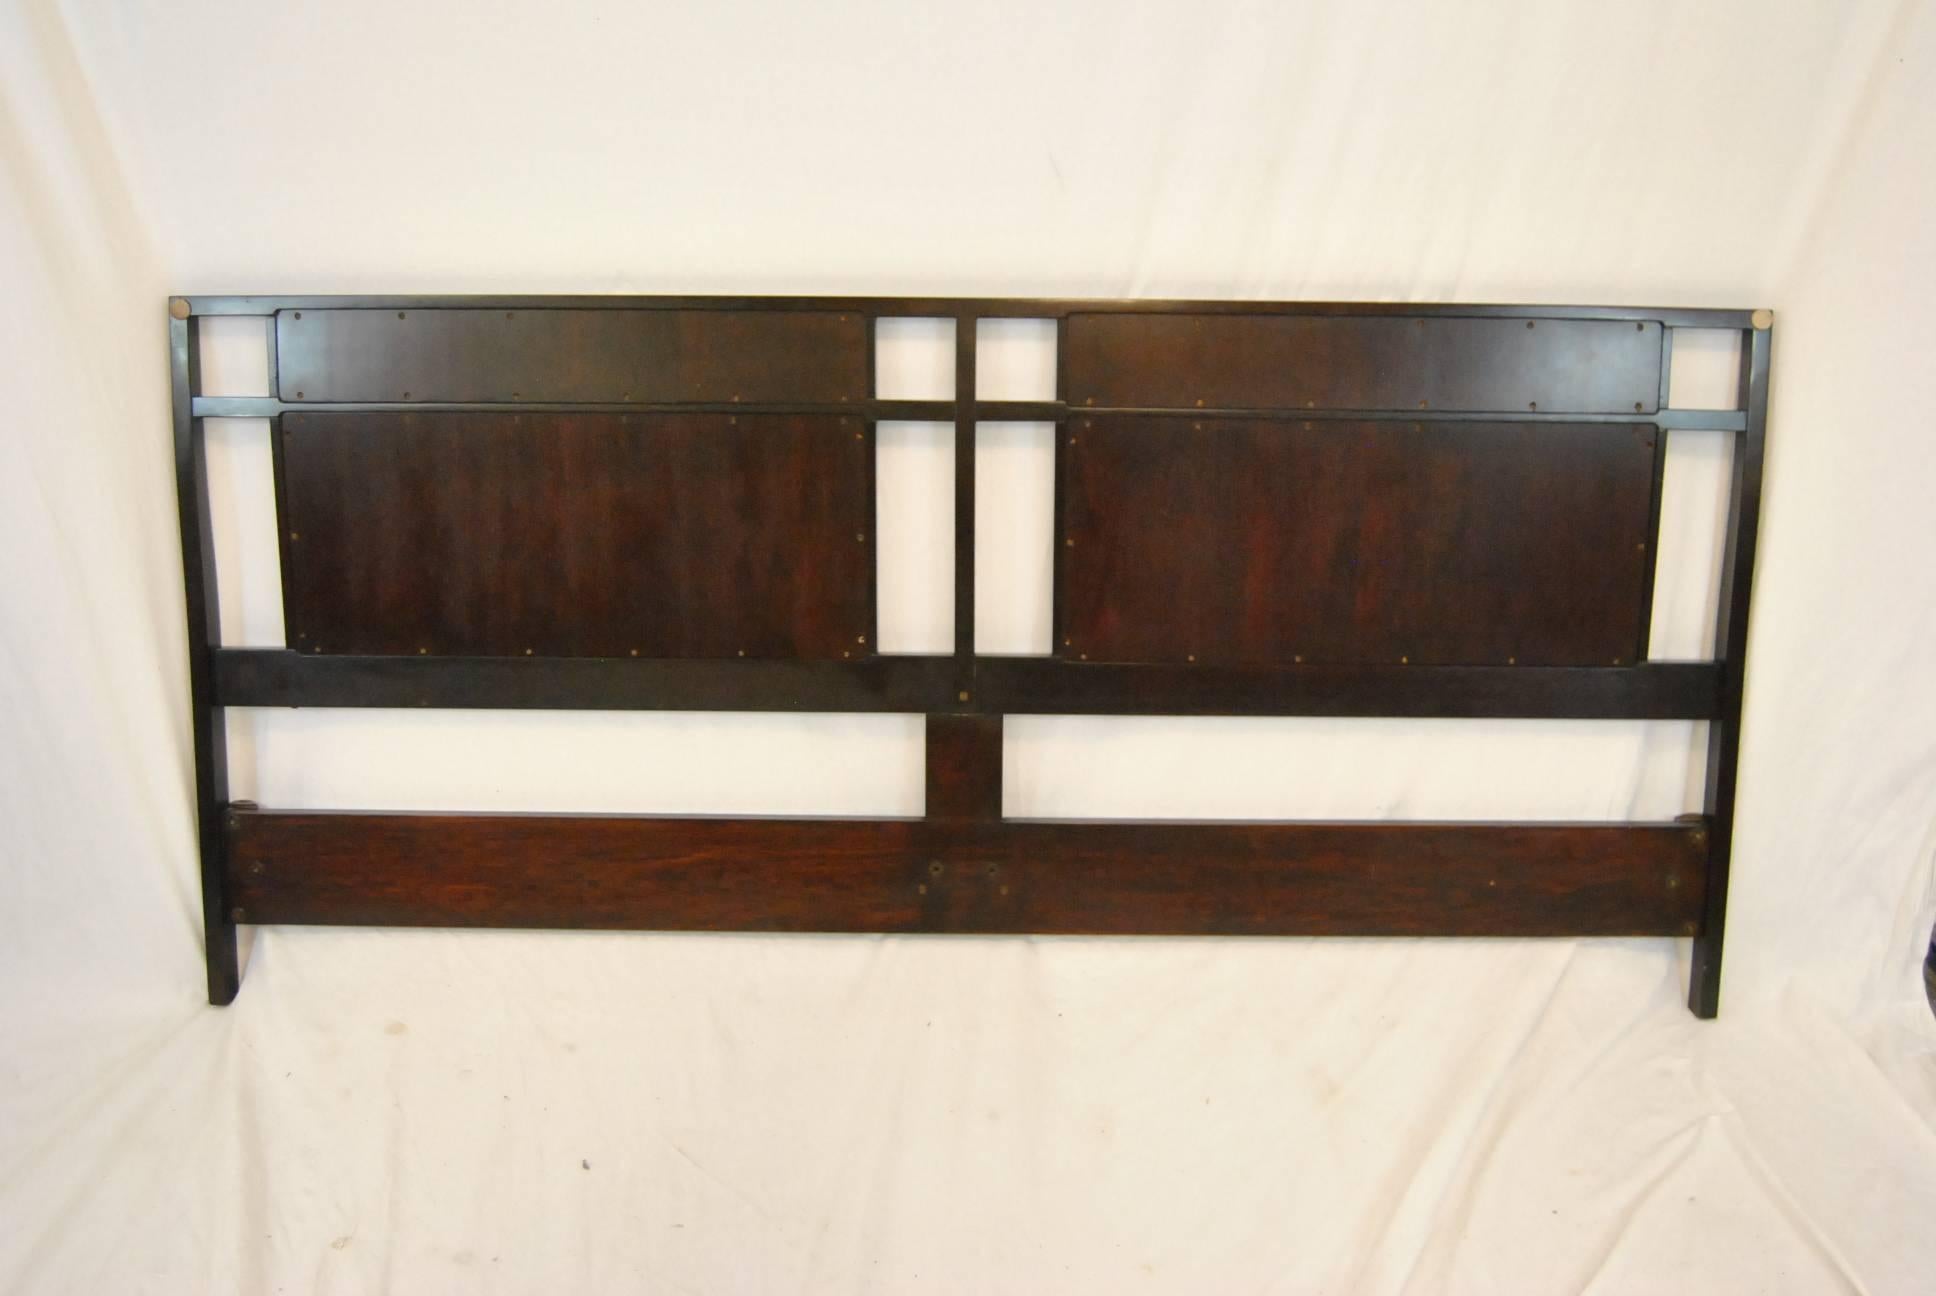 King-size headboard by Dunbar designed by Edward Wormley. Striking graphic panels of walnut and cane framed in a dark stained wood. Very nice pre owned condition. 80" wide x 37" tall.